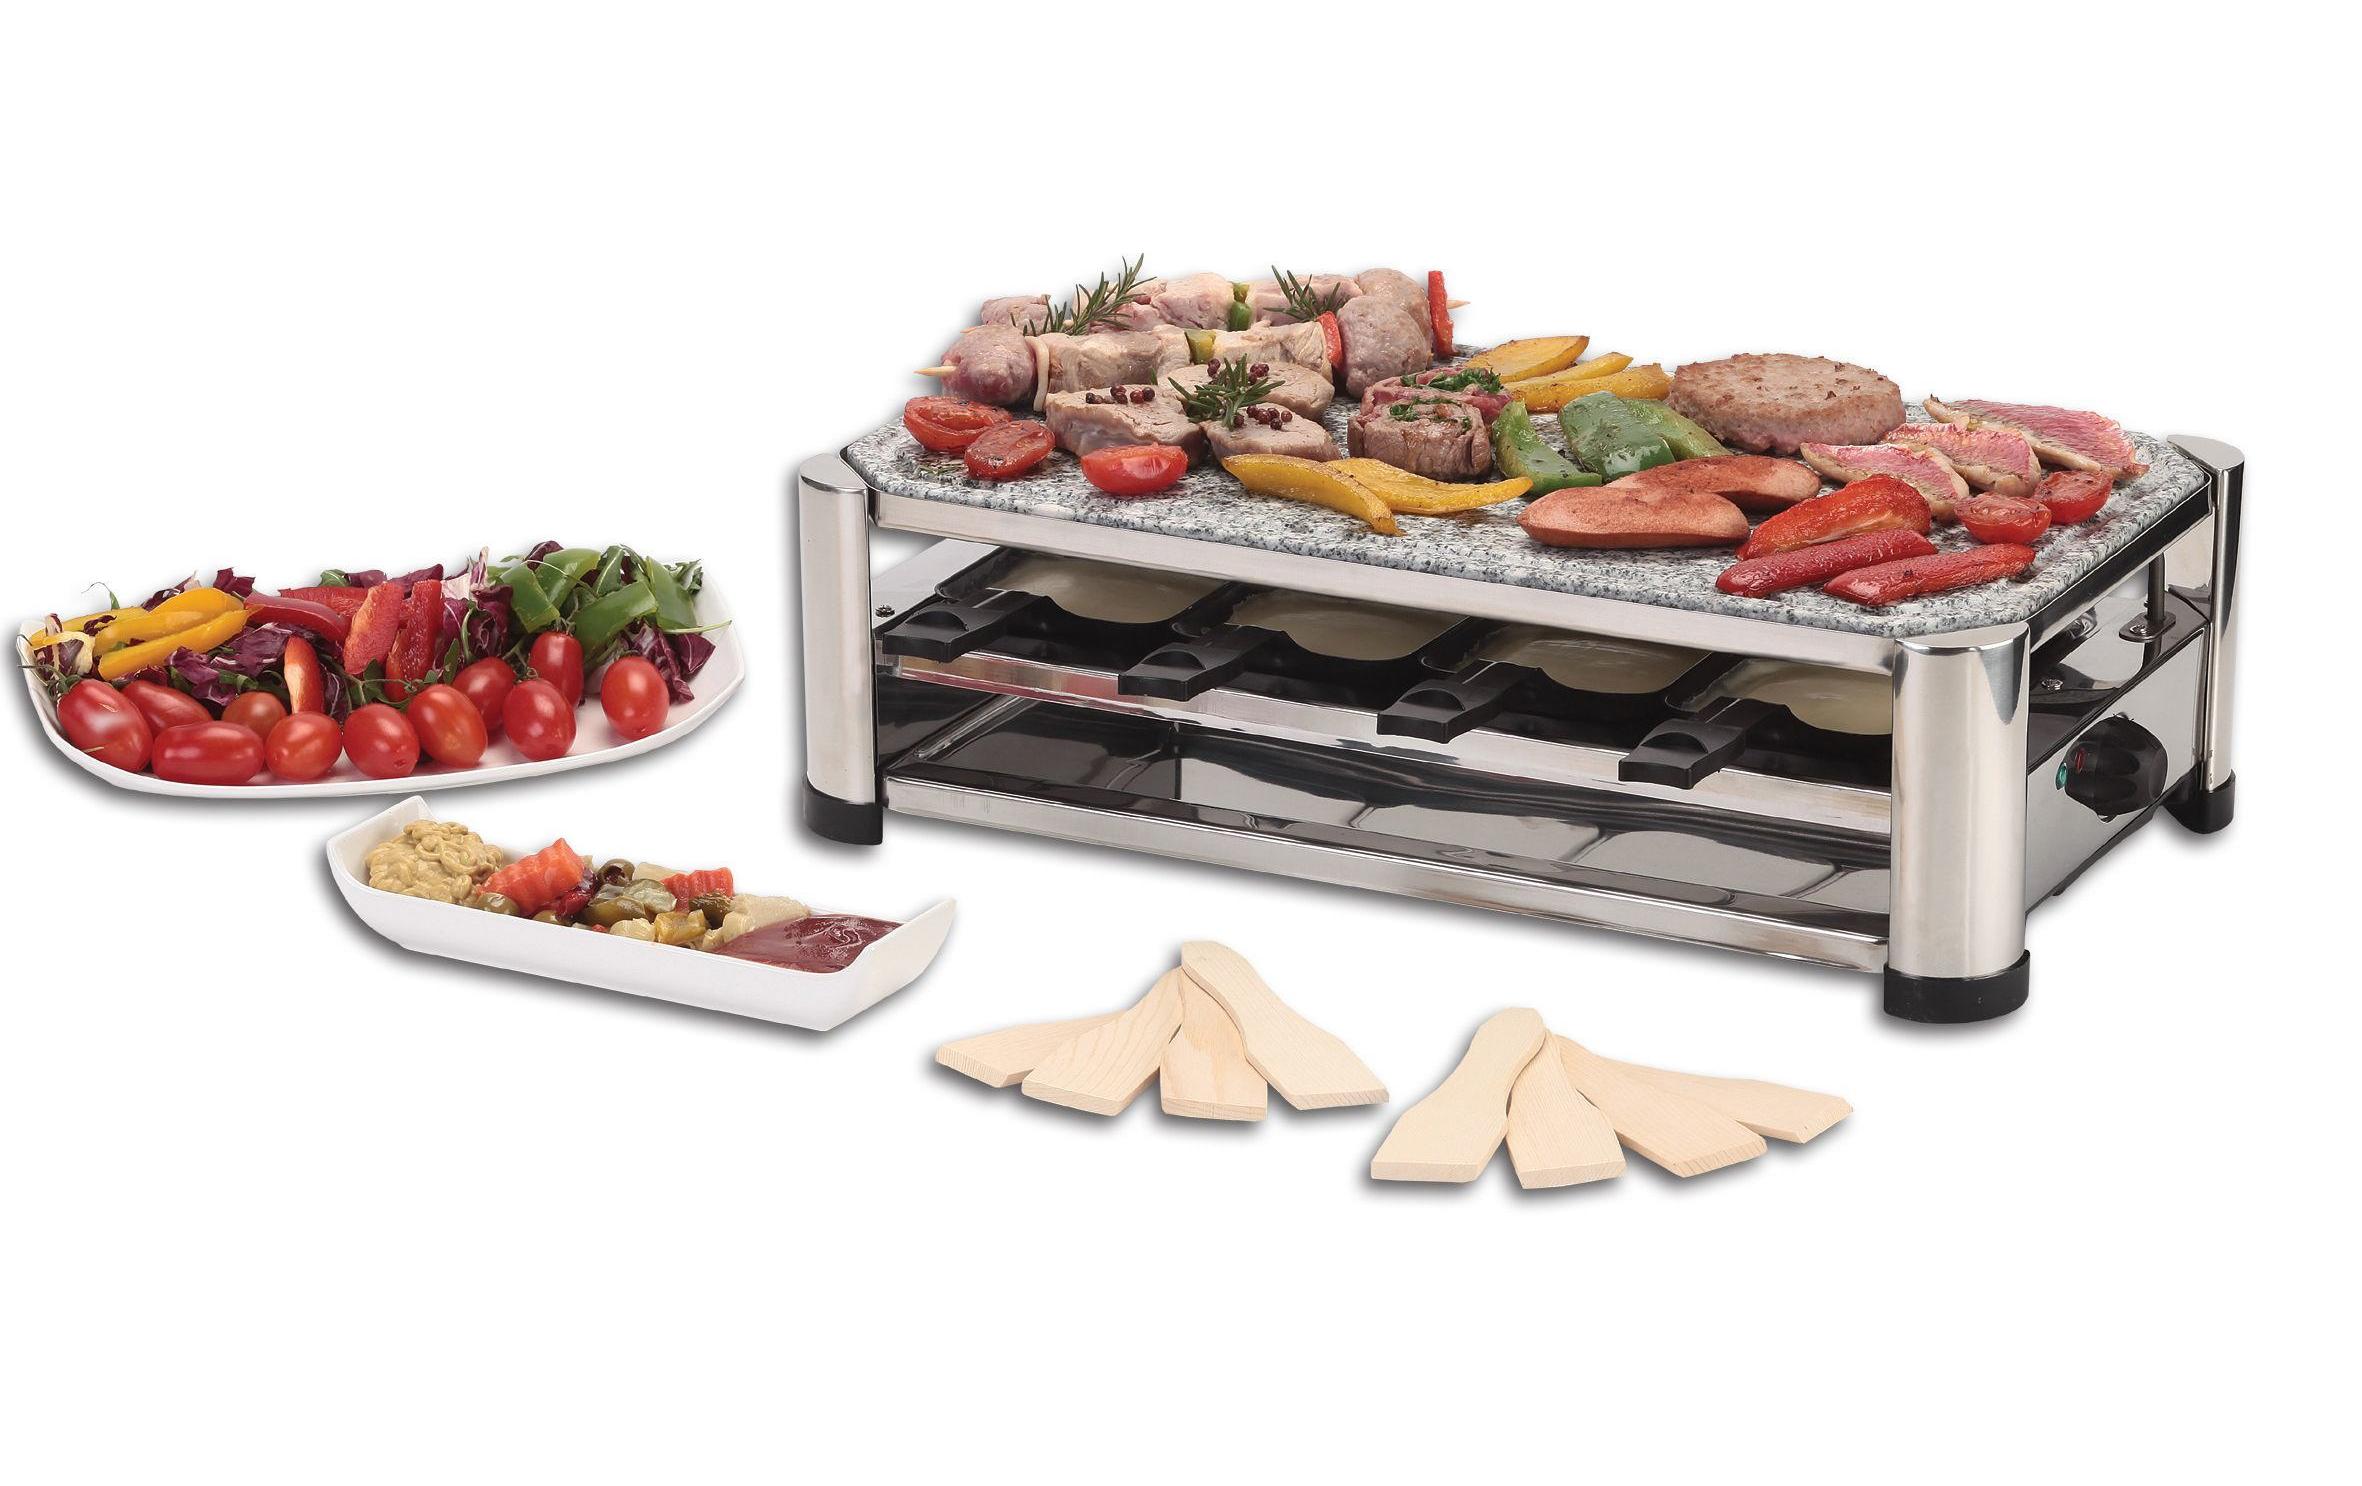 OHMEX Raclette-Grill 4500 8 Personen